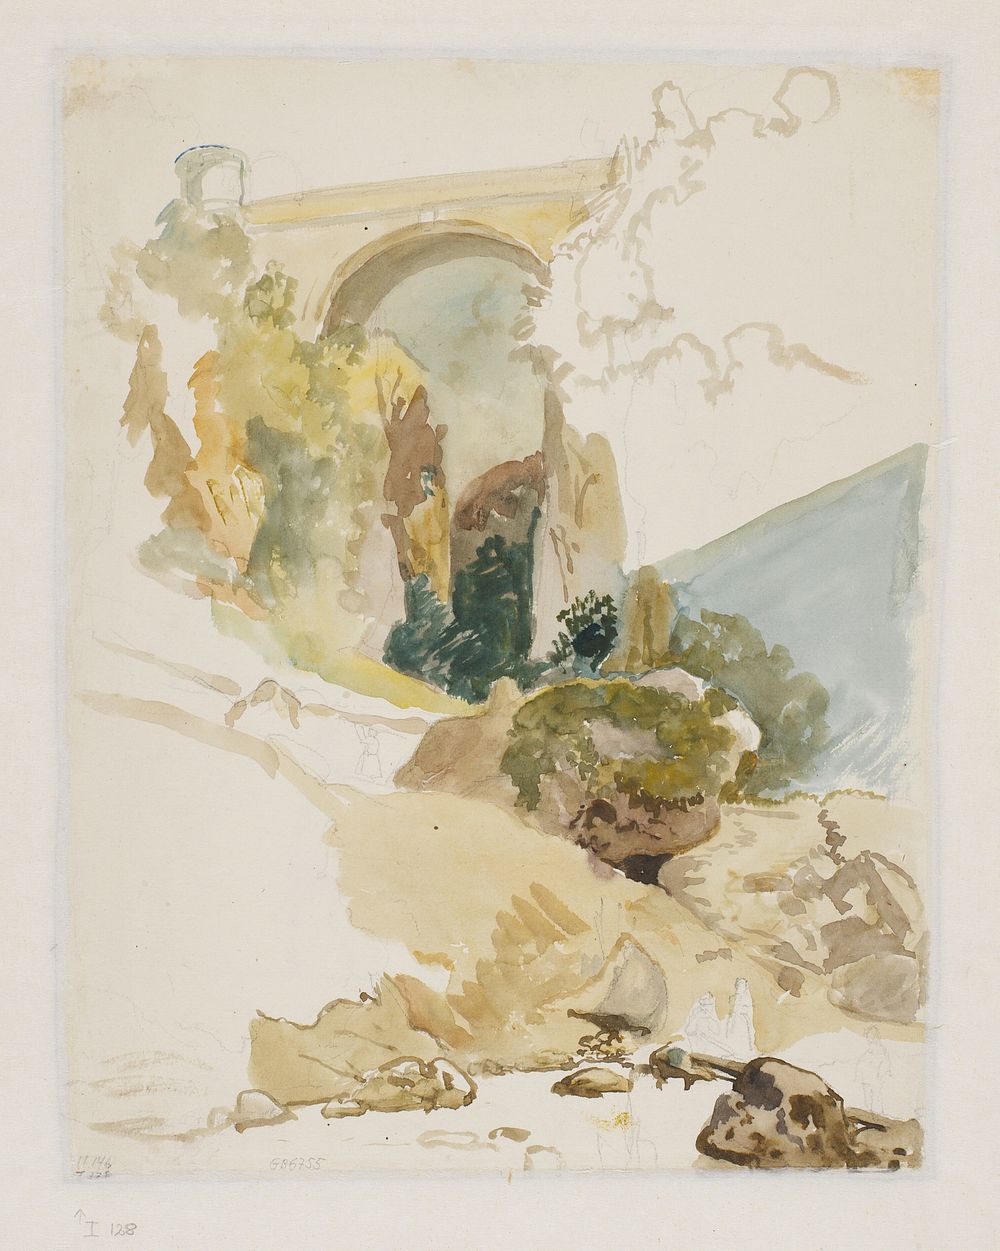 Watercolor study of landscape with a bridge over a ravine by Wilhelm Marstrand